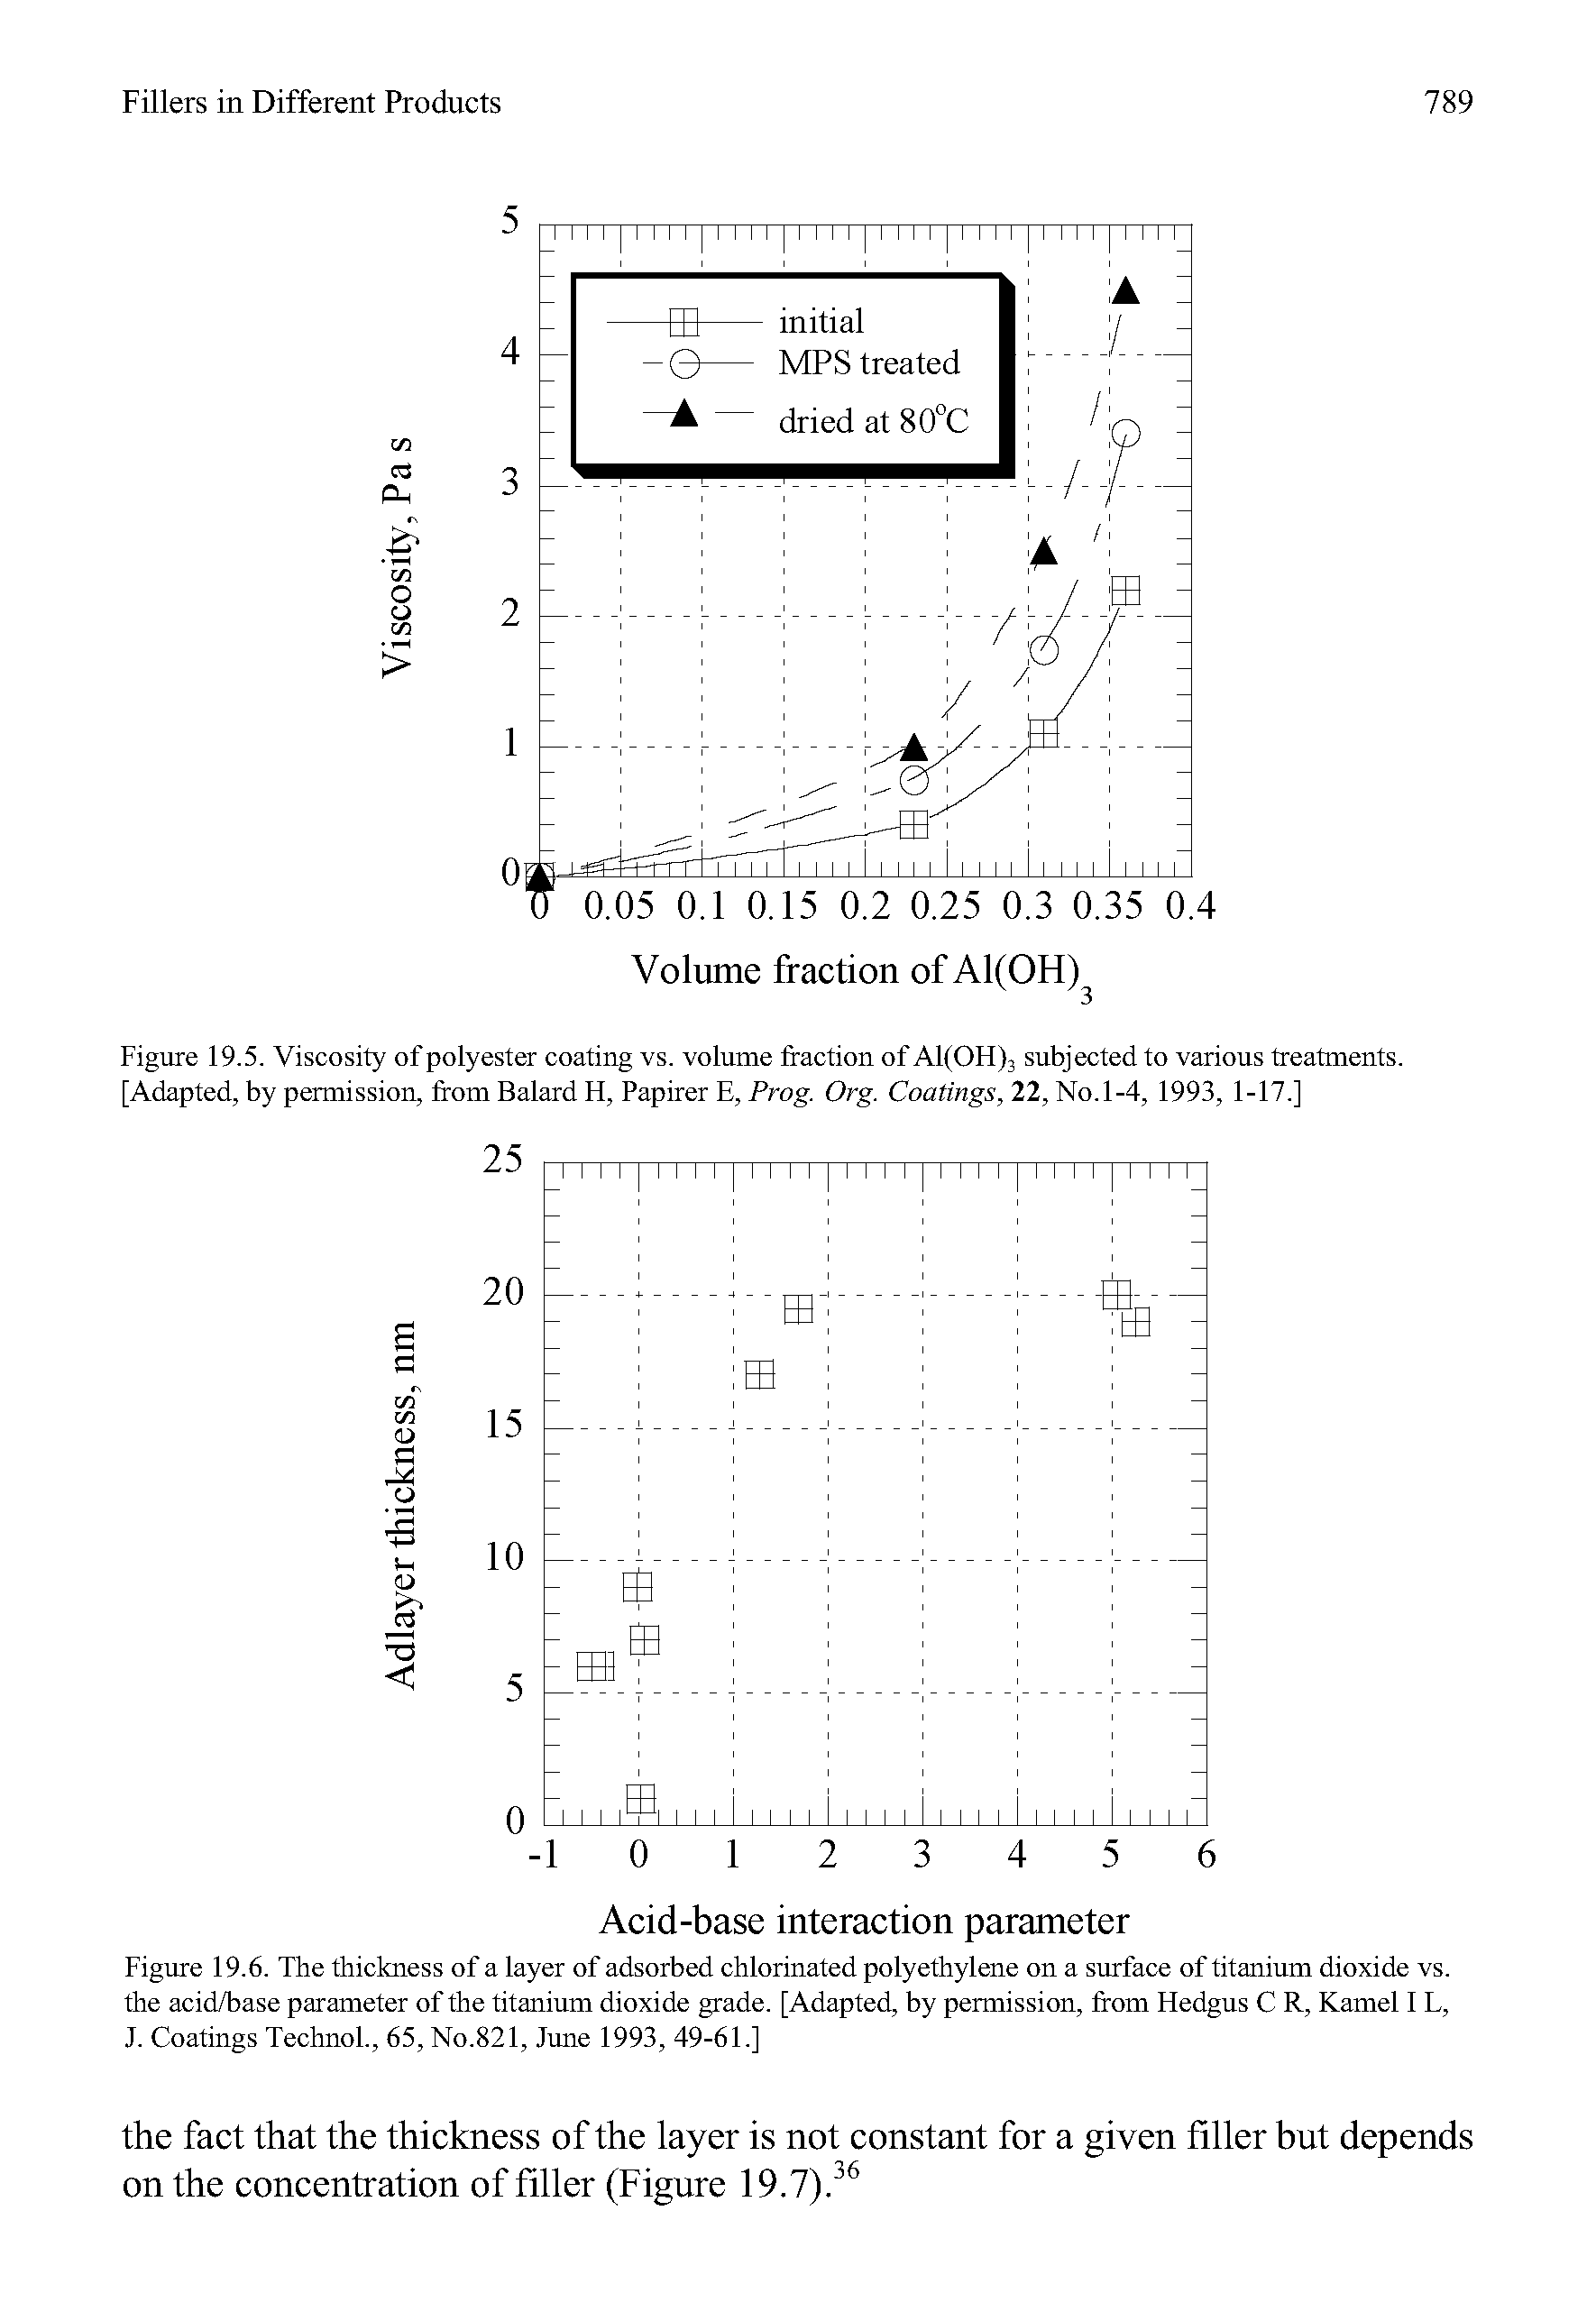 Figure 19.6. The thickness of a layer of adsorbed chlorinated polyethylene on a surface of titanium dioxide vs. the acid/base parameter of the titanium dioxide grade. [Adapted, by permission, from Hedgus C R, Kamel I L, J. Coatings Technol., 65, No.821, June 1993, 49-61.]...